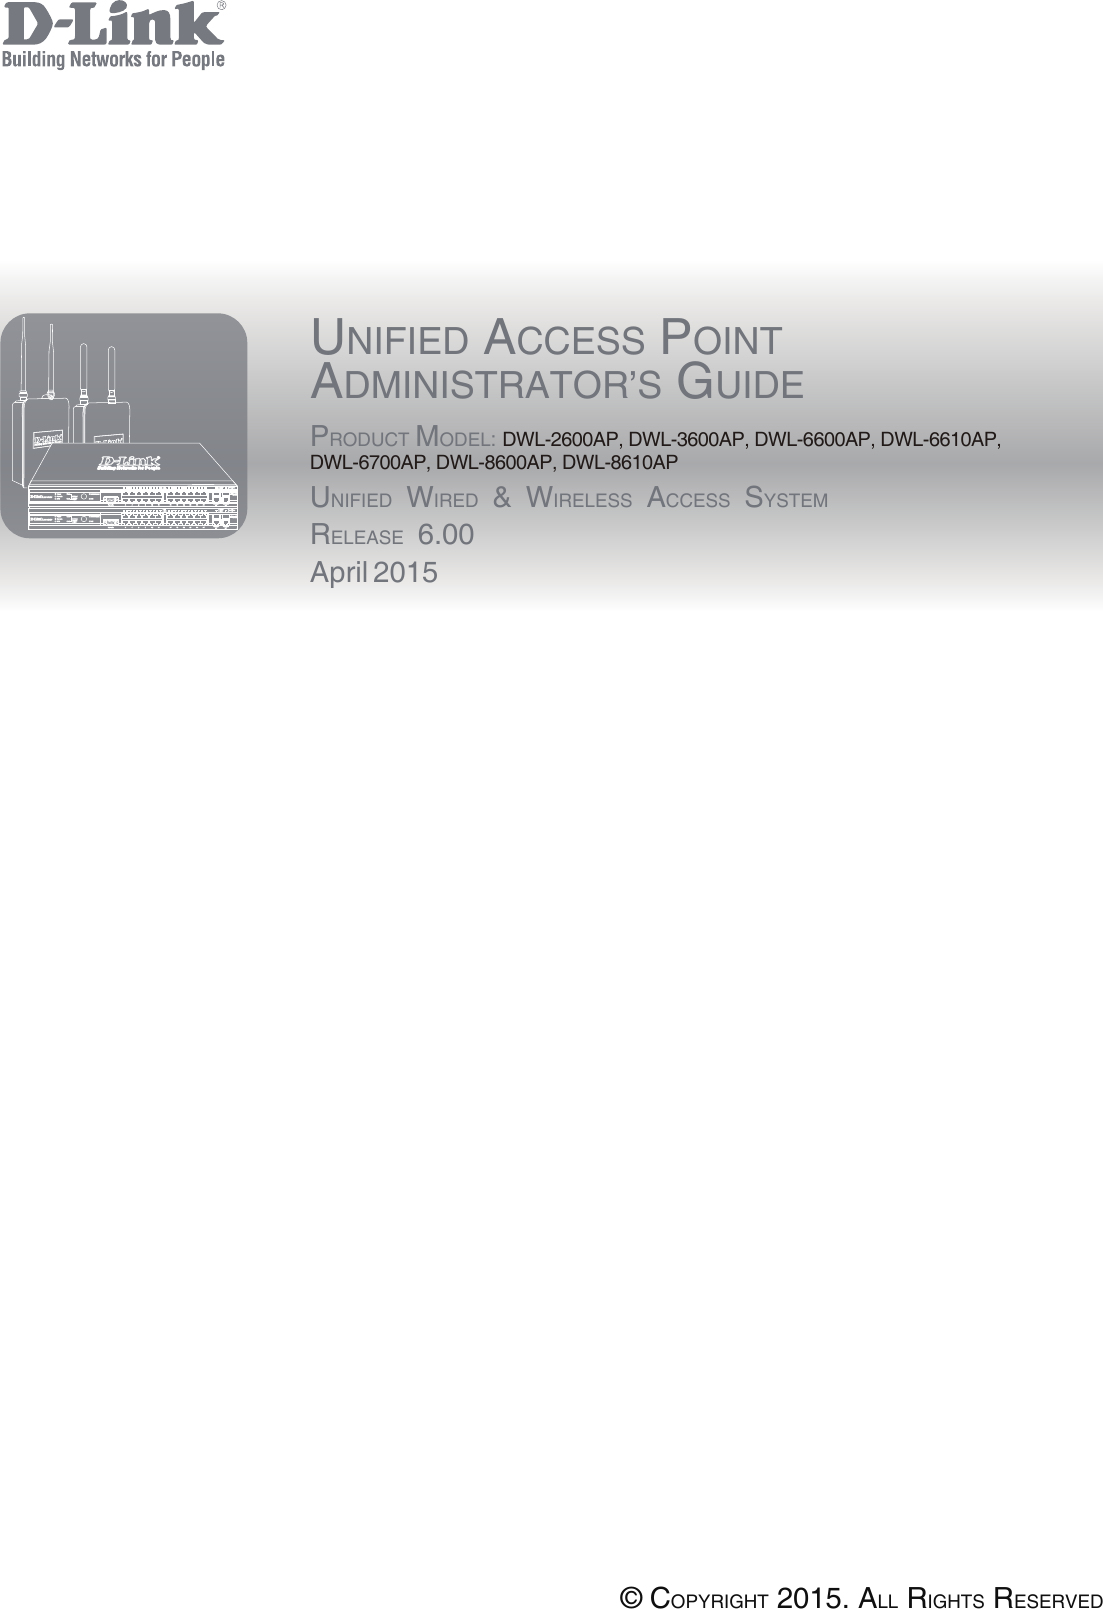 UNIFIED ACCESS POINTADMINISTRATOR’S GUIDEPRODUCT MODEL: DWL-2600AP, DWL-3600AP, DWL-6600AP, DWL-6610AP, DWL-6700AP, DWL-8600AP, DWL-8610APUNIFIED WIRED &amp; WIRELESS ACCESS SYSTEMRELEASE 6.00April 2015© COPYRIGHT 2015. ALL RIGHTS RESERVED